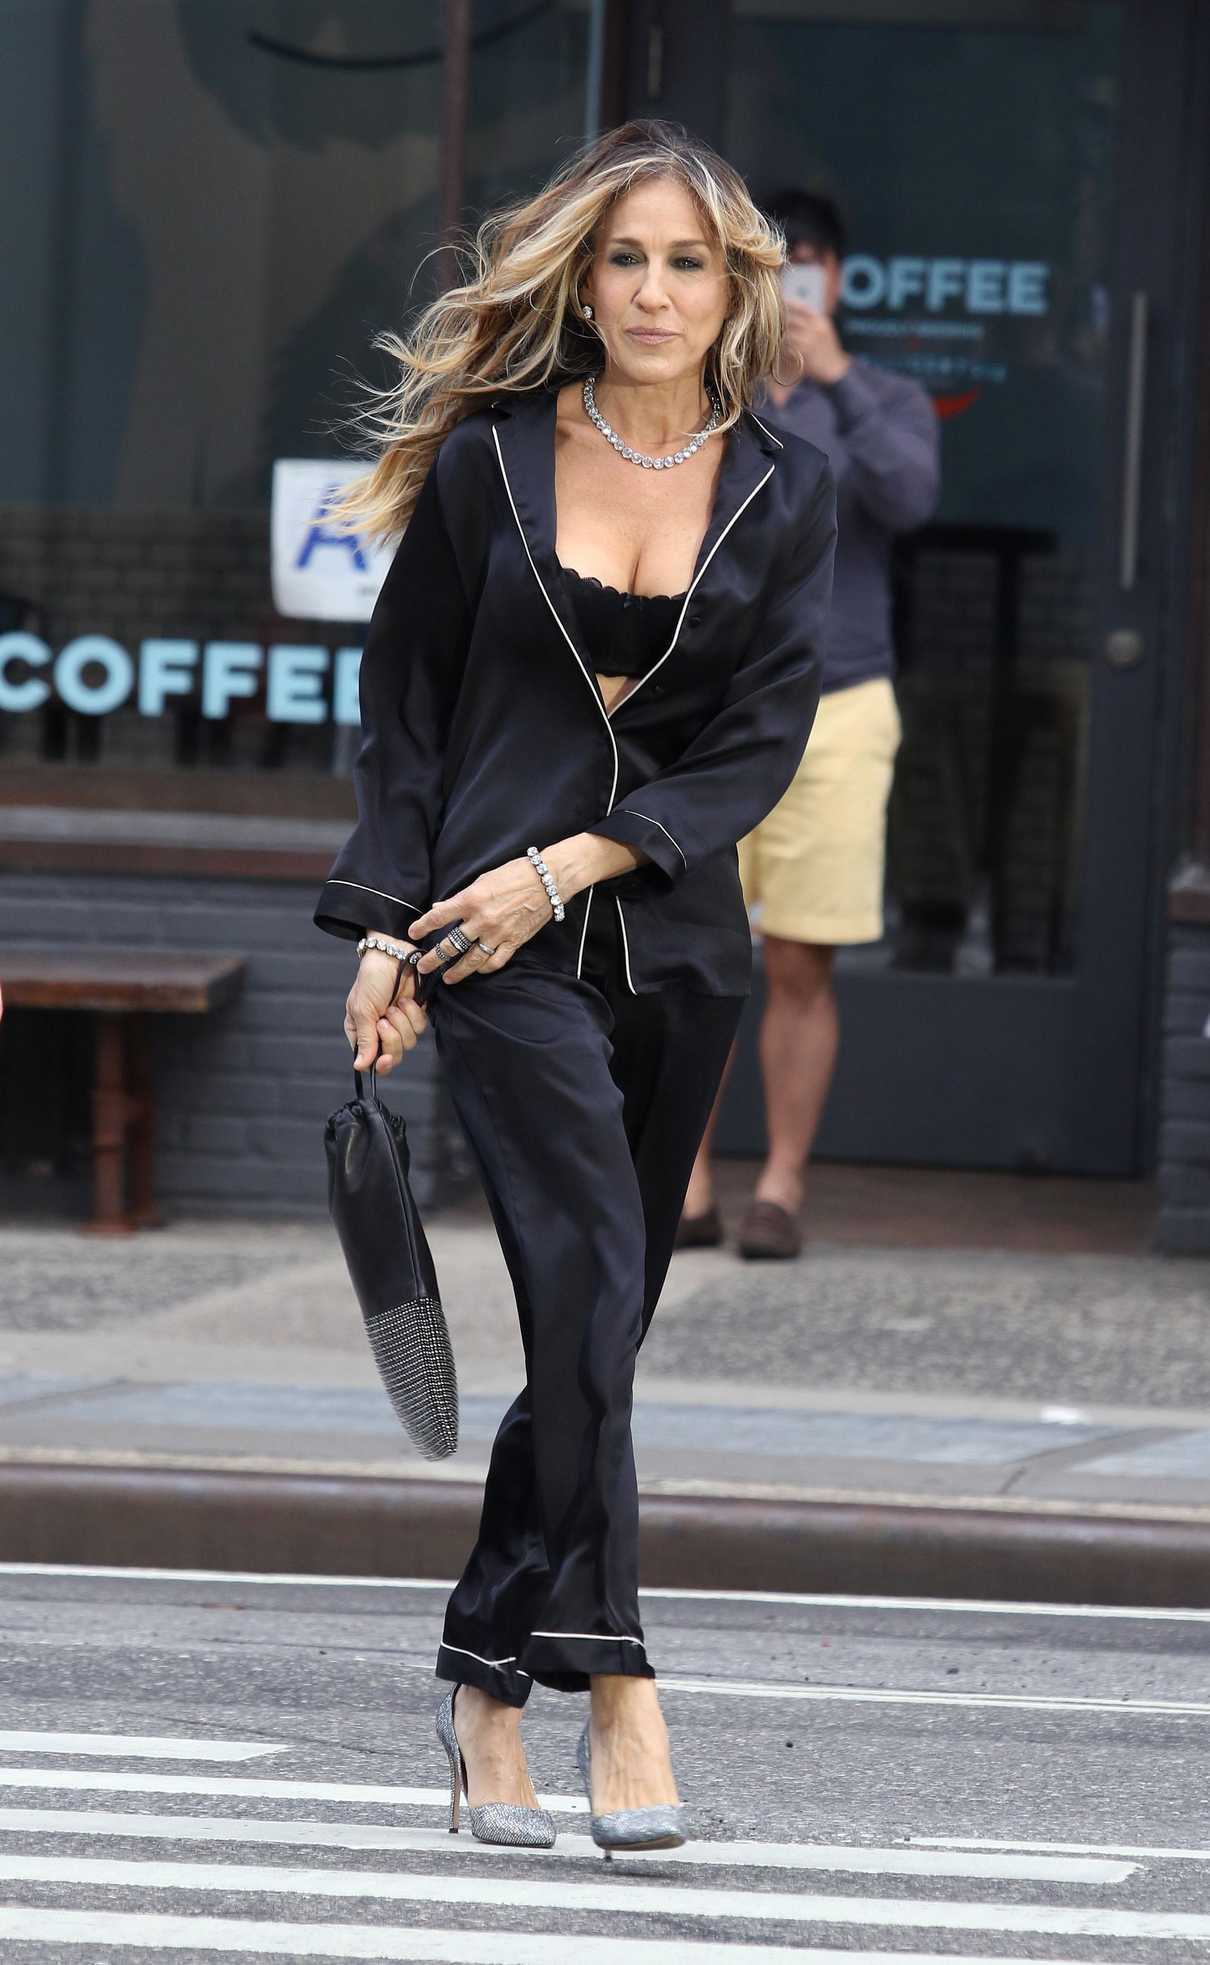 Sarah Jessica Parker Films a Commercial for Intimissimi lingerie in Downtown in ...1210 x 1965